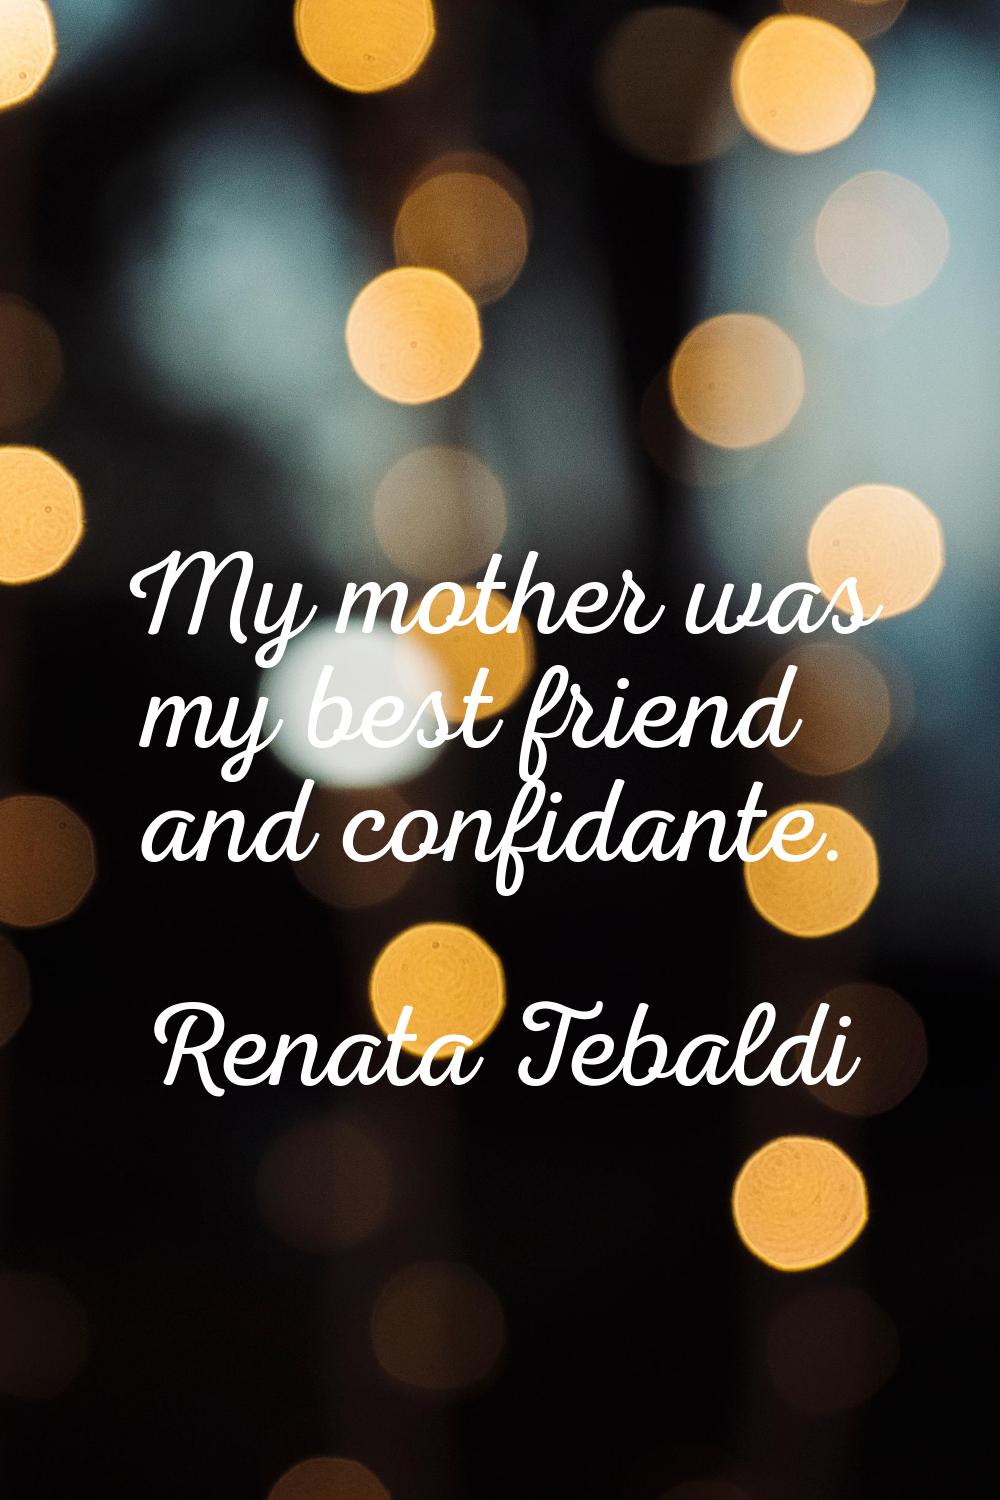 My mother was my best friend and confidante.